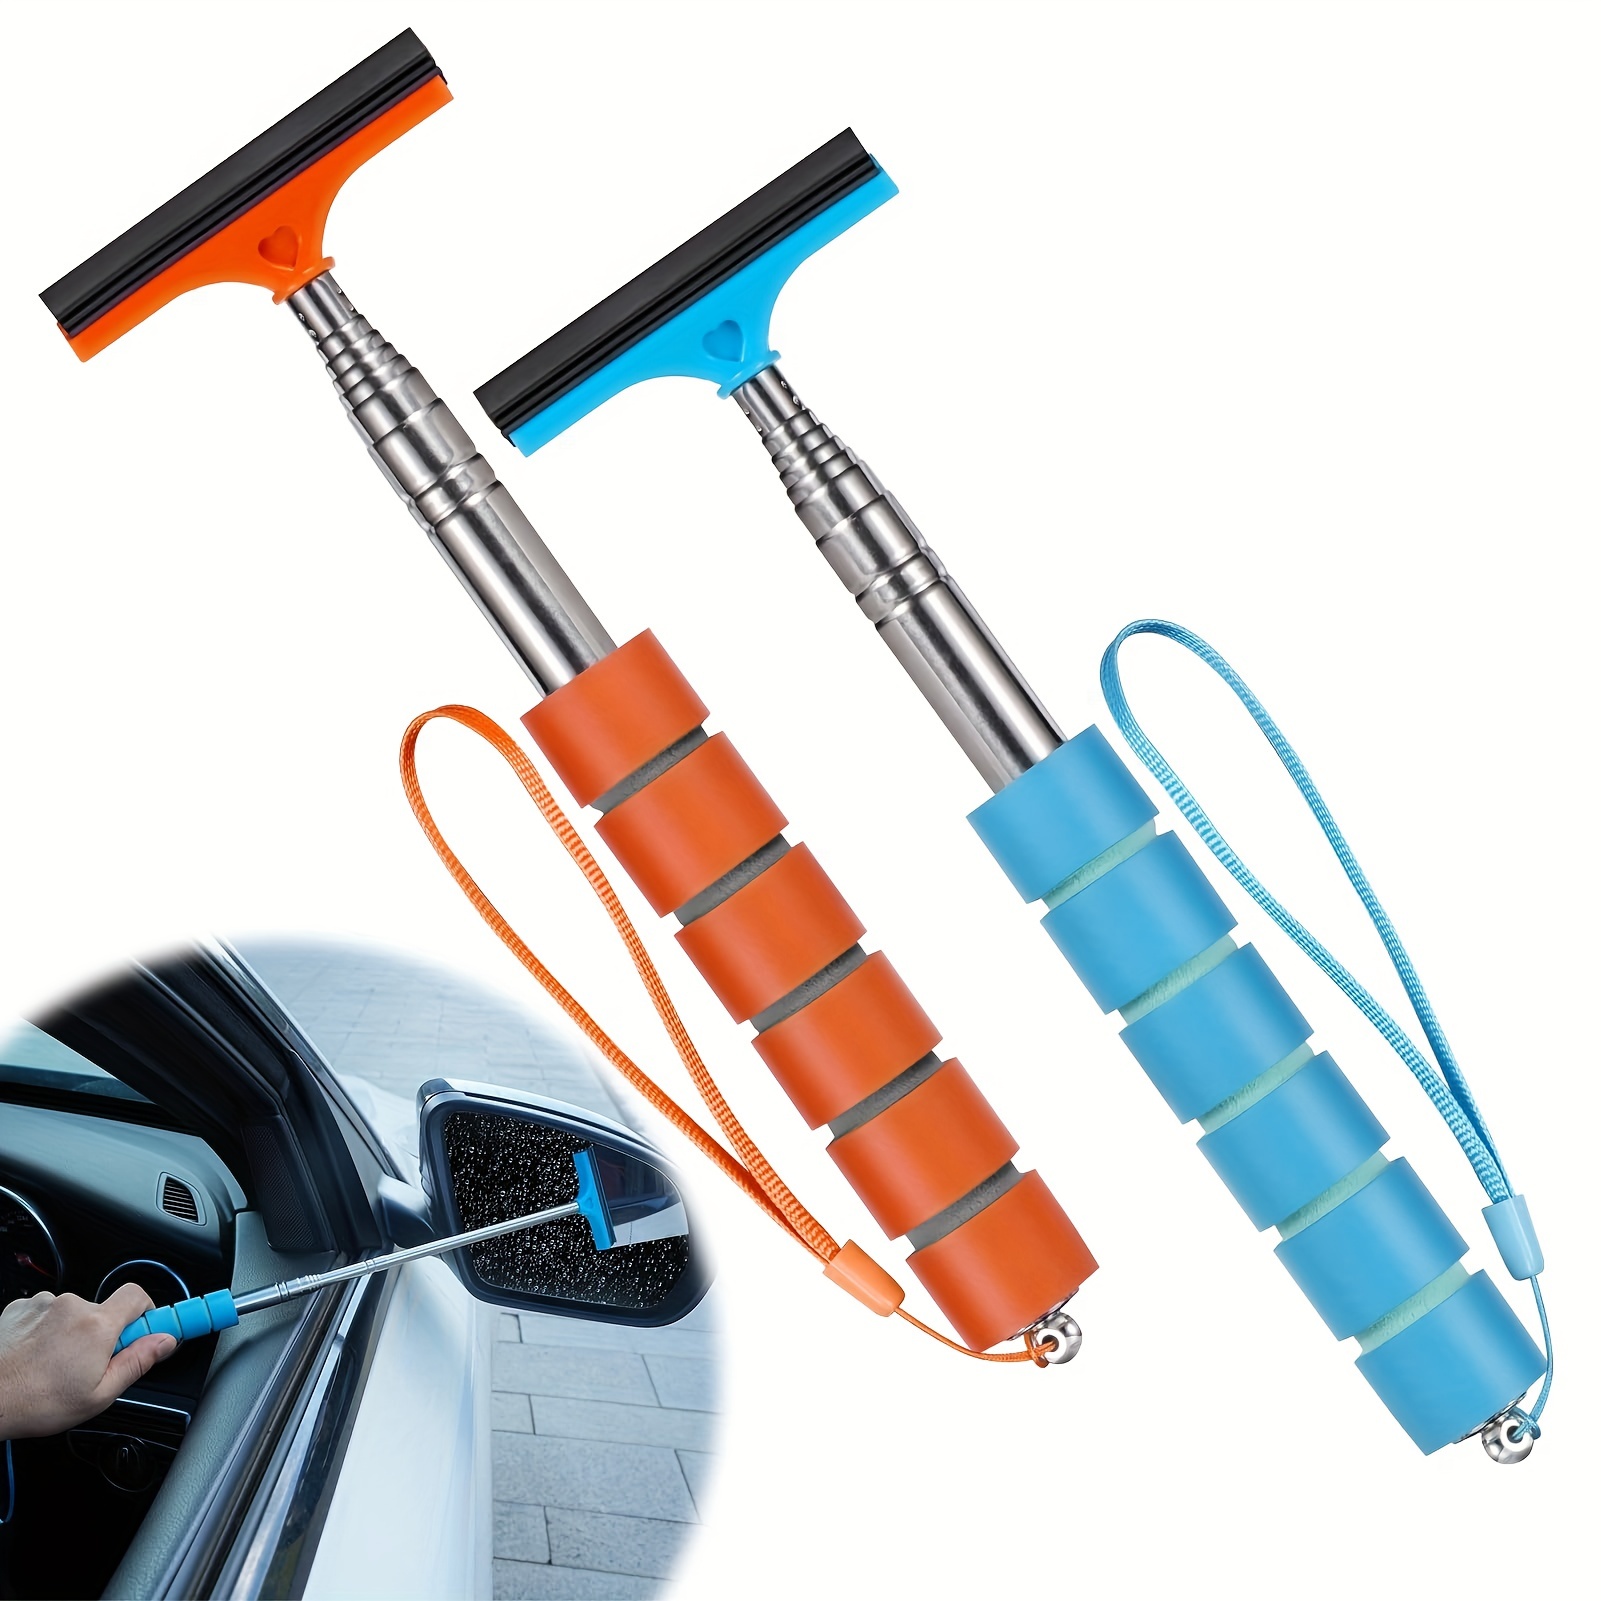 3pcs Flexible Silicone Squeegee, Blade Window Squeegee Shower Squeegee For  Glass Doors, Car Windshield, Mirror, Window